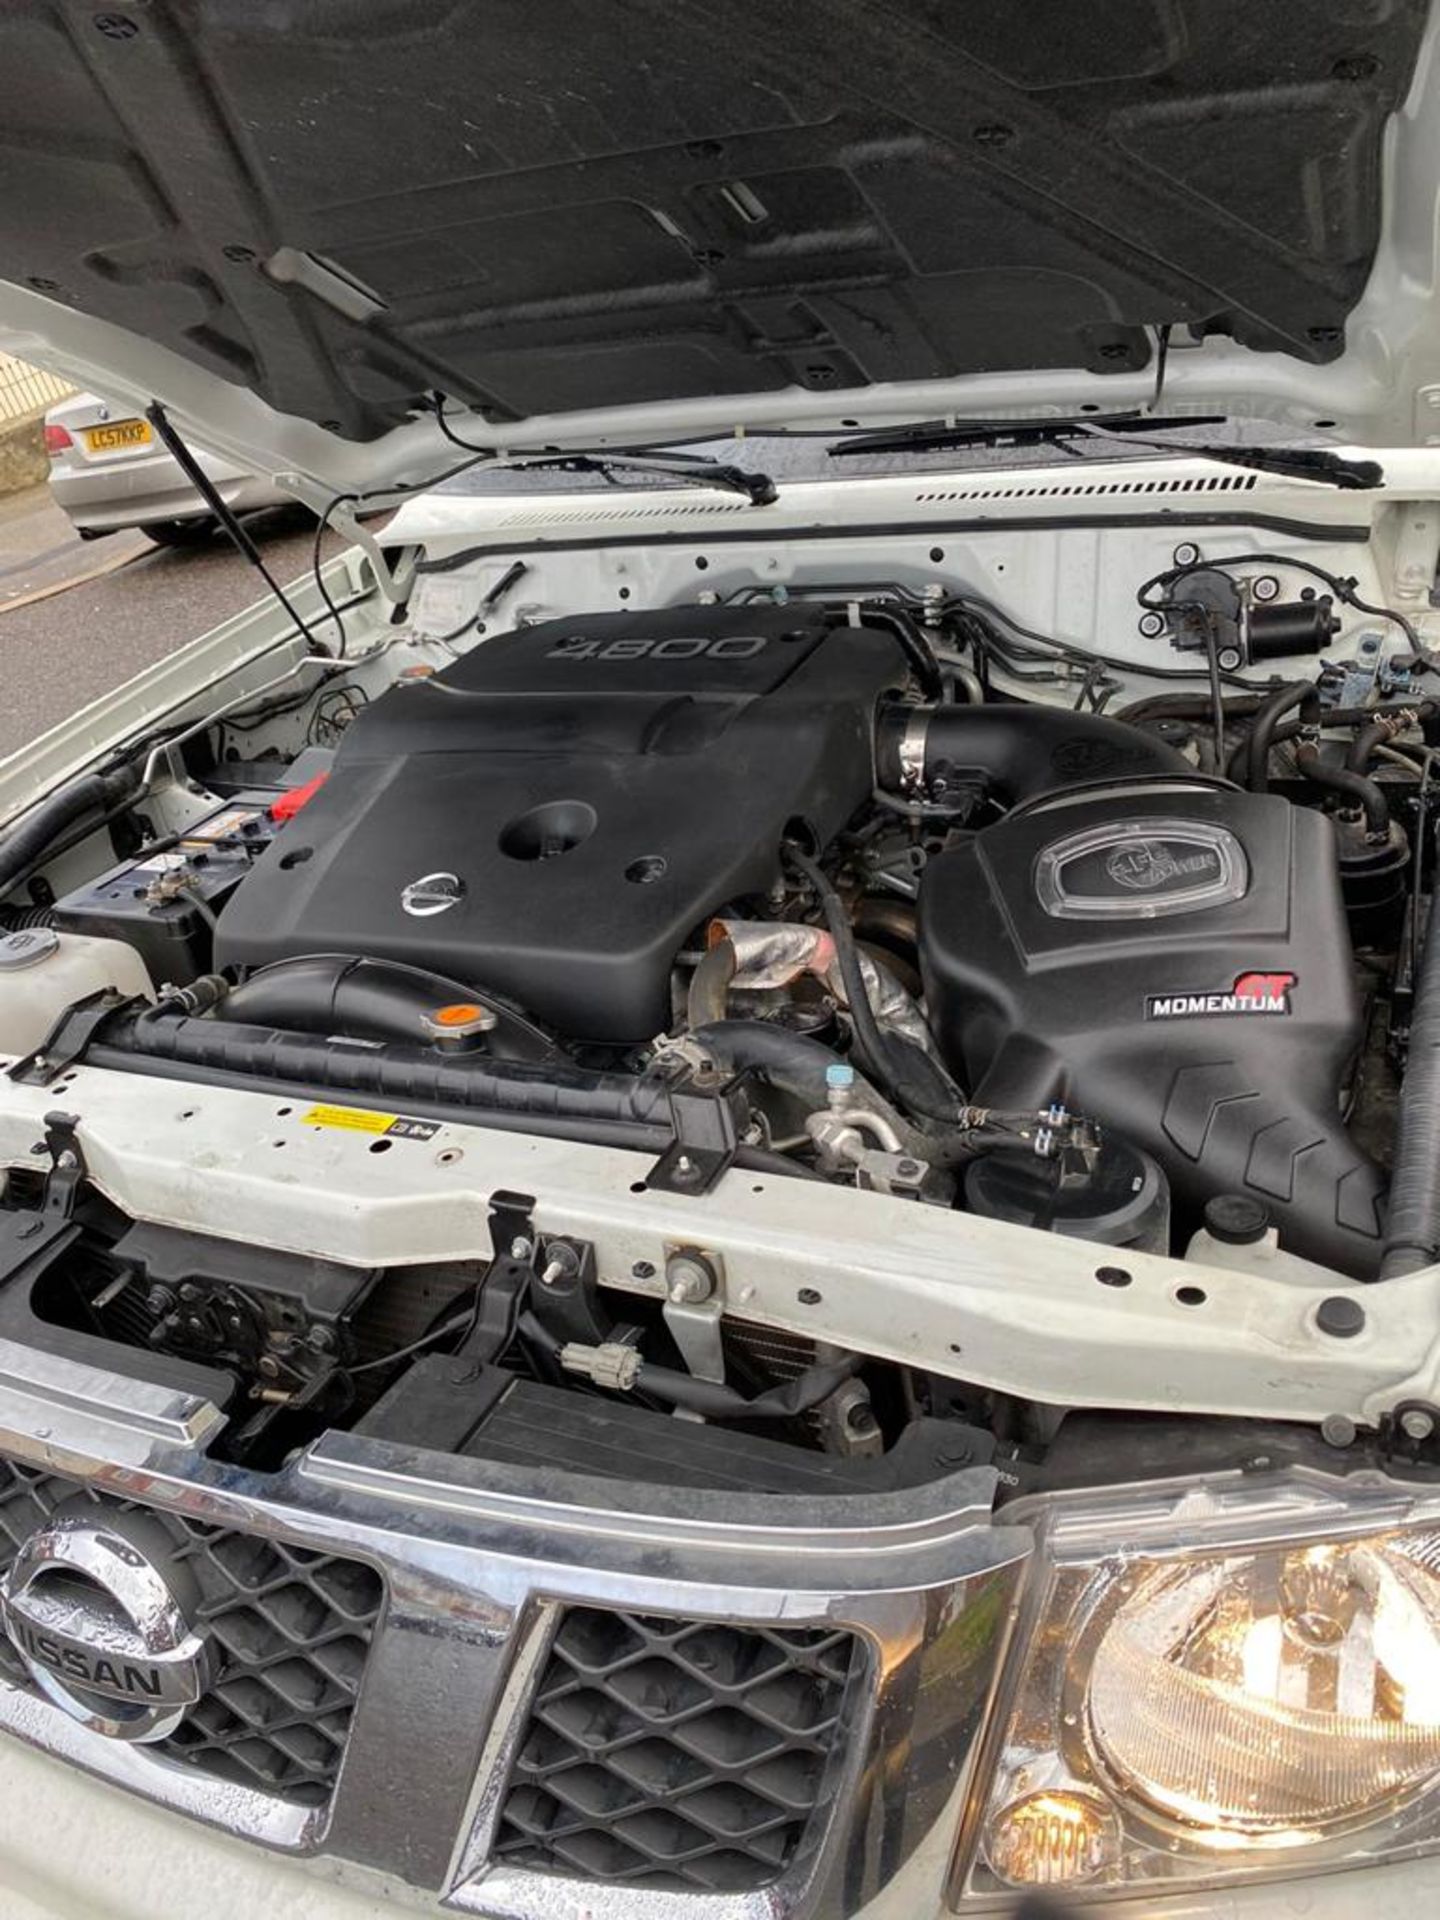 NISSAN PATROL VTC 4800 4.8 LITRE V6 2018 2DR LHD, LEFT IN MAY 2019, 28,000 KM, SHIPPED FROM QATAR - Image 12 of 15